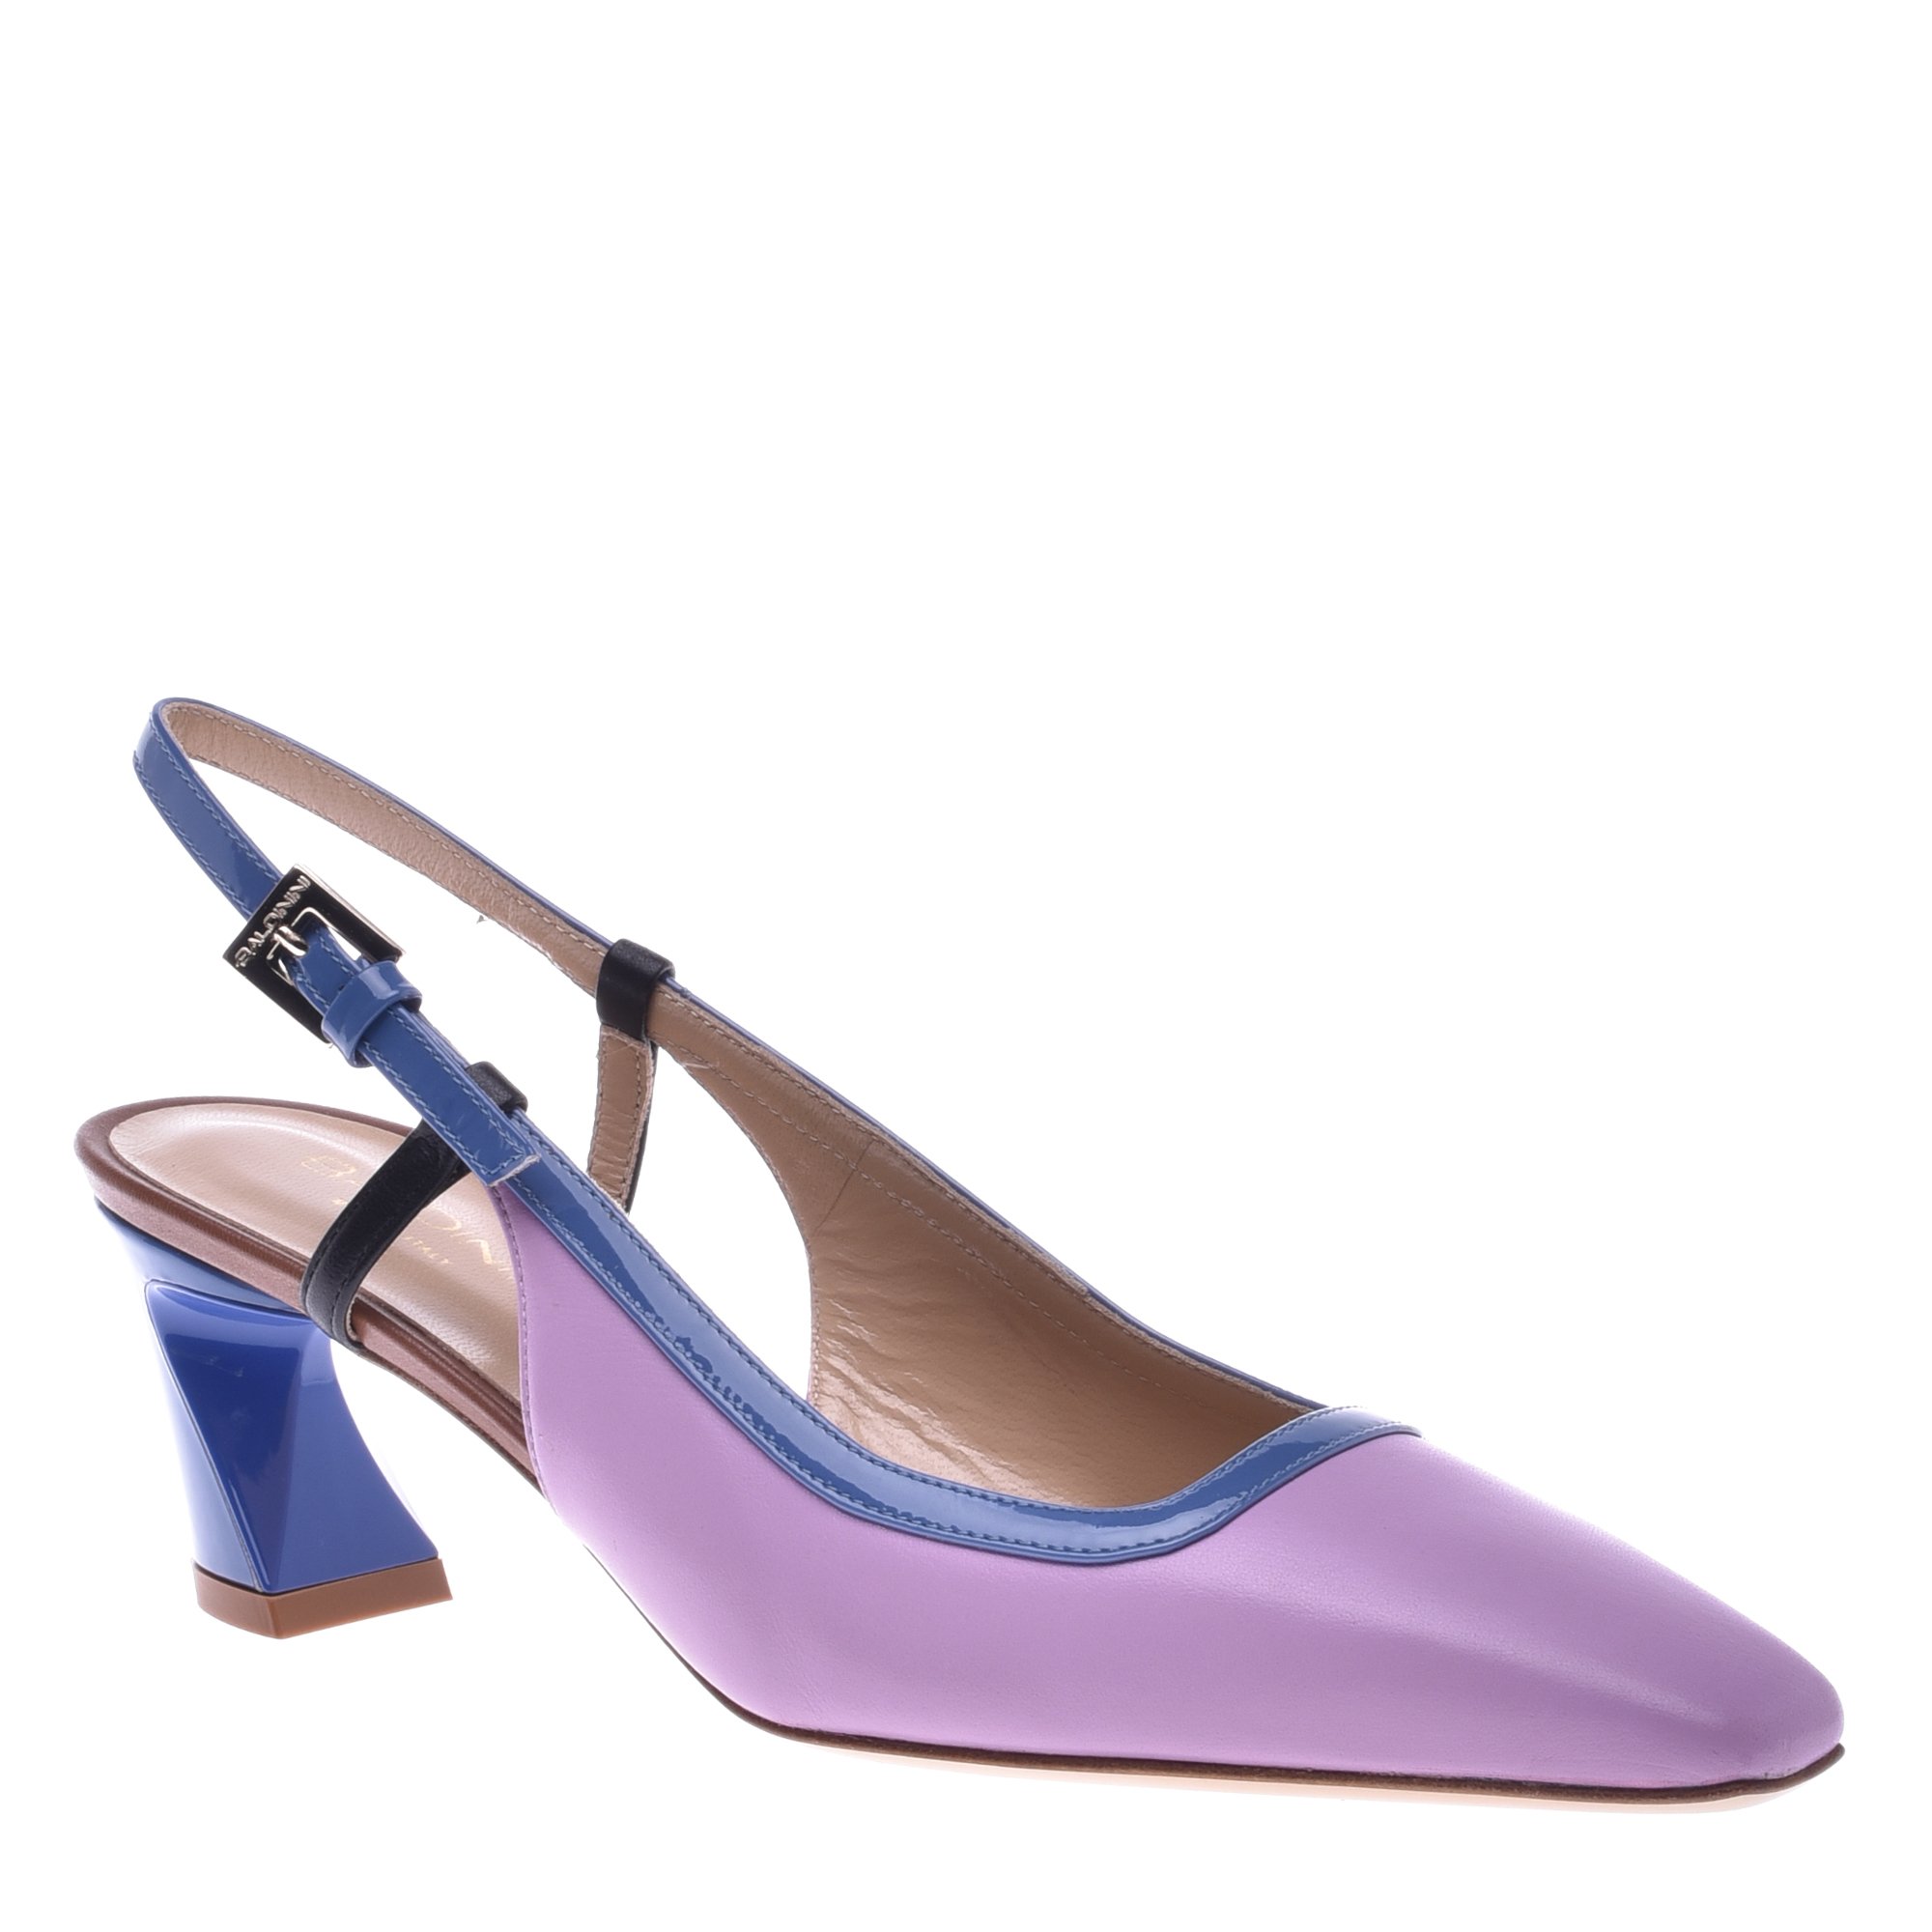 Court shoe in lilac and blue calfskin image